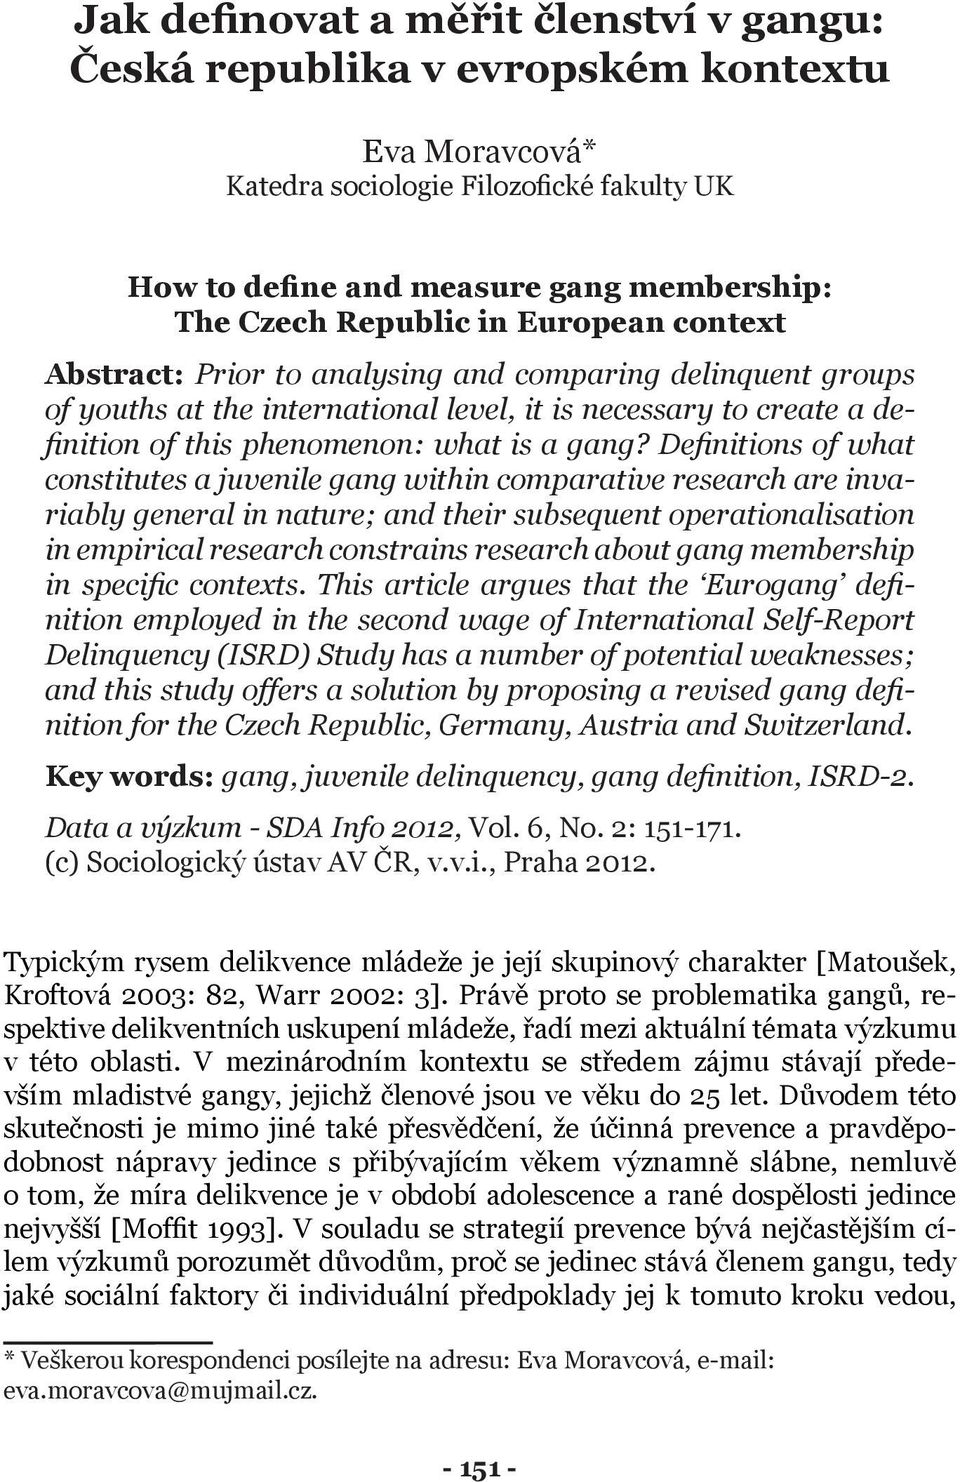 Definitions of what constitutes a juvenile gang within comparative research are invariably general in nature; and their subsequent operationalisation in empirical research constrains research about